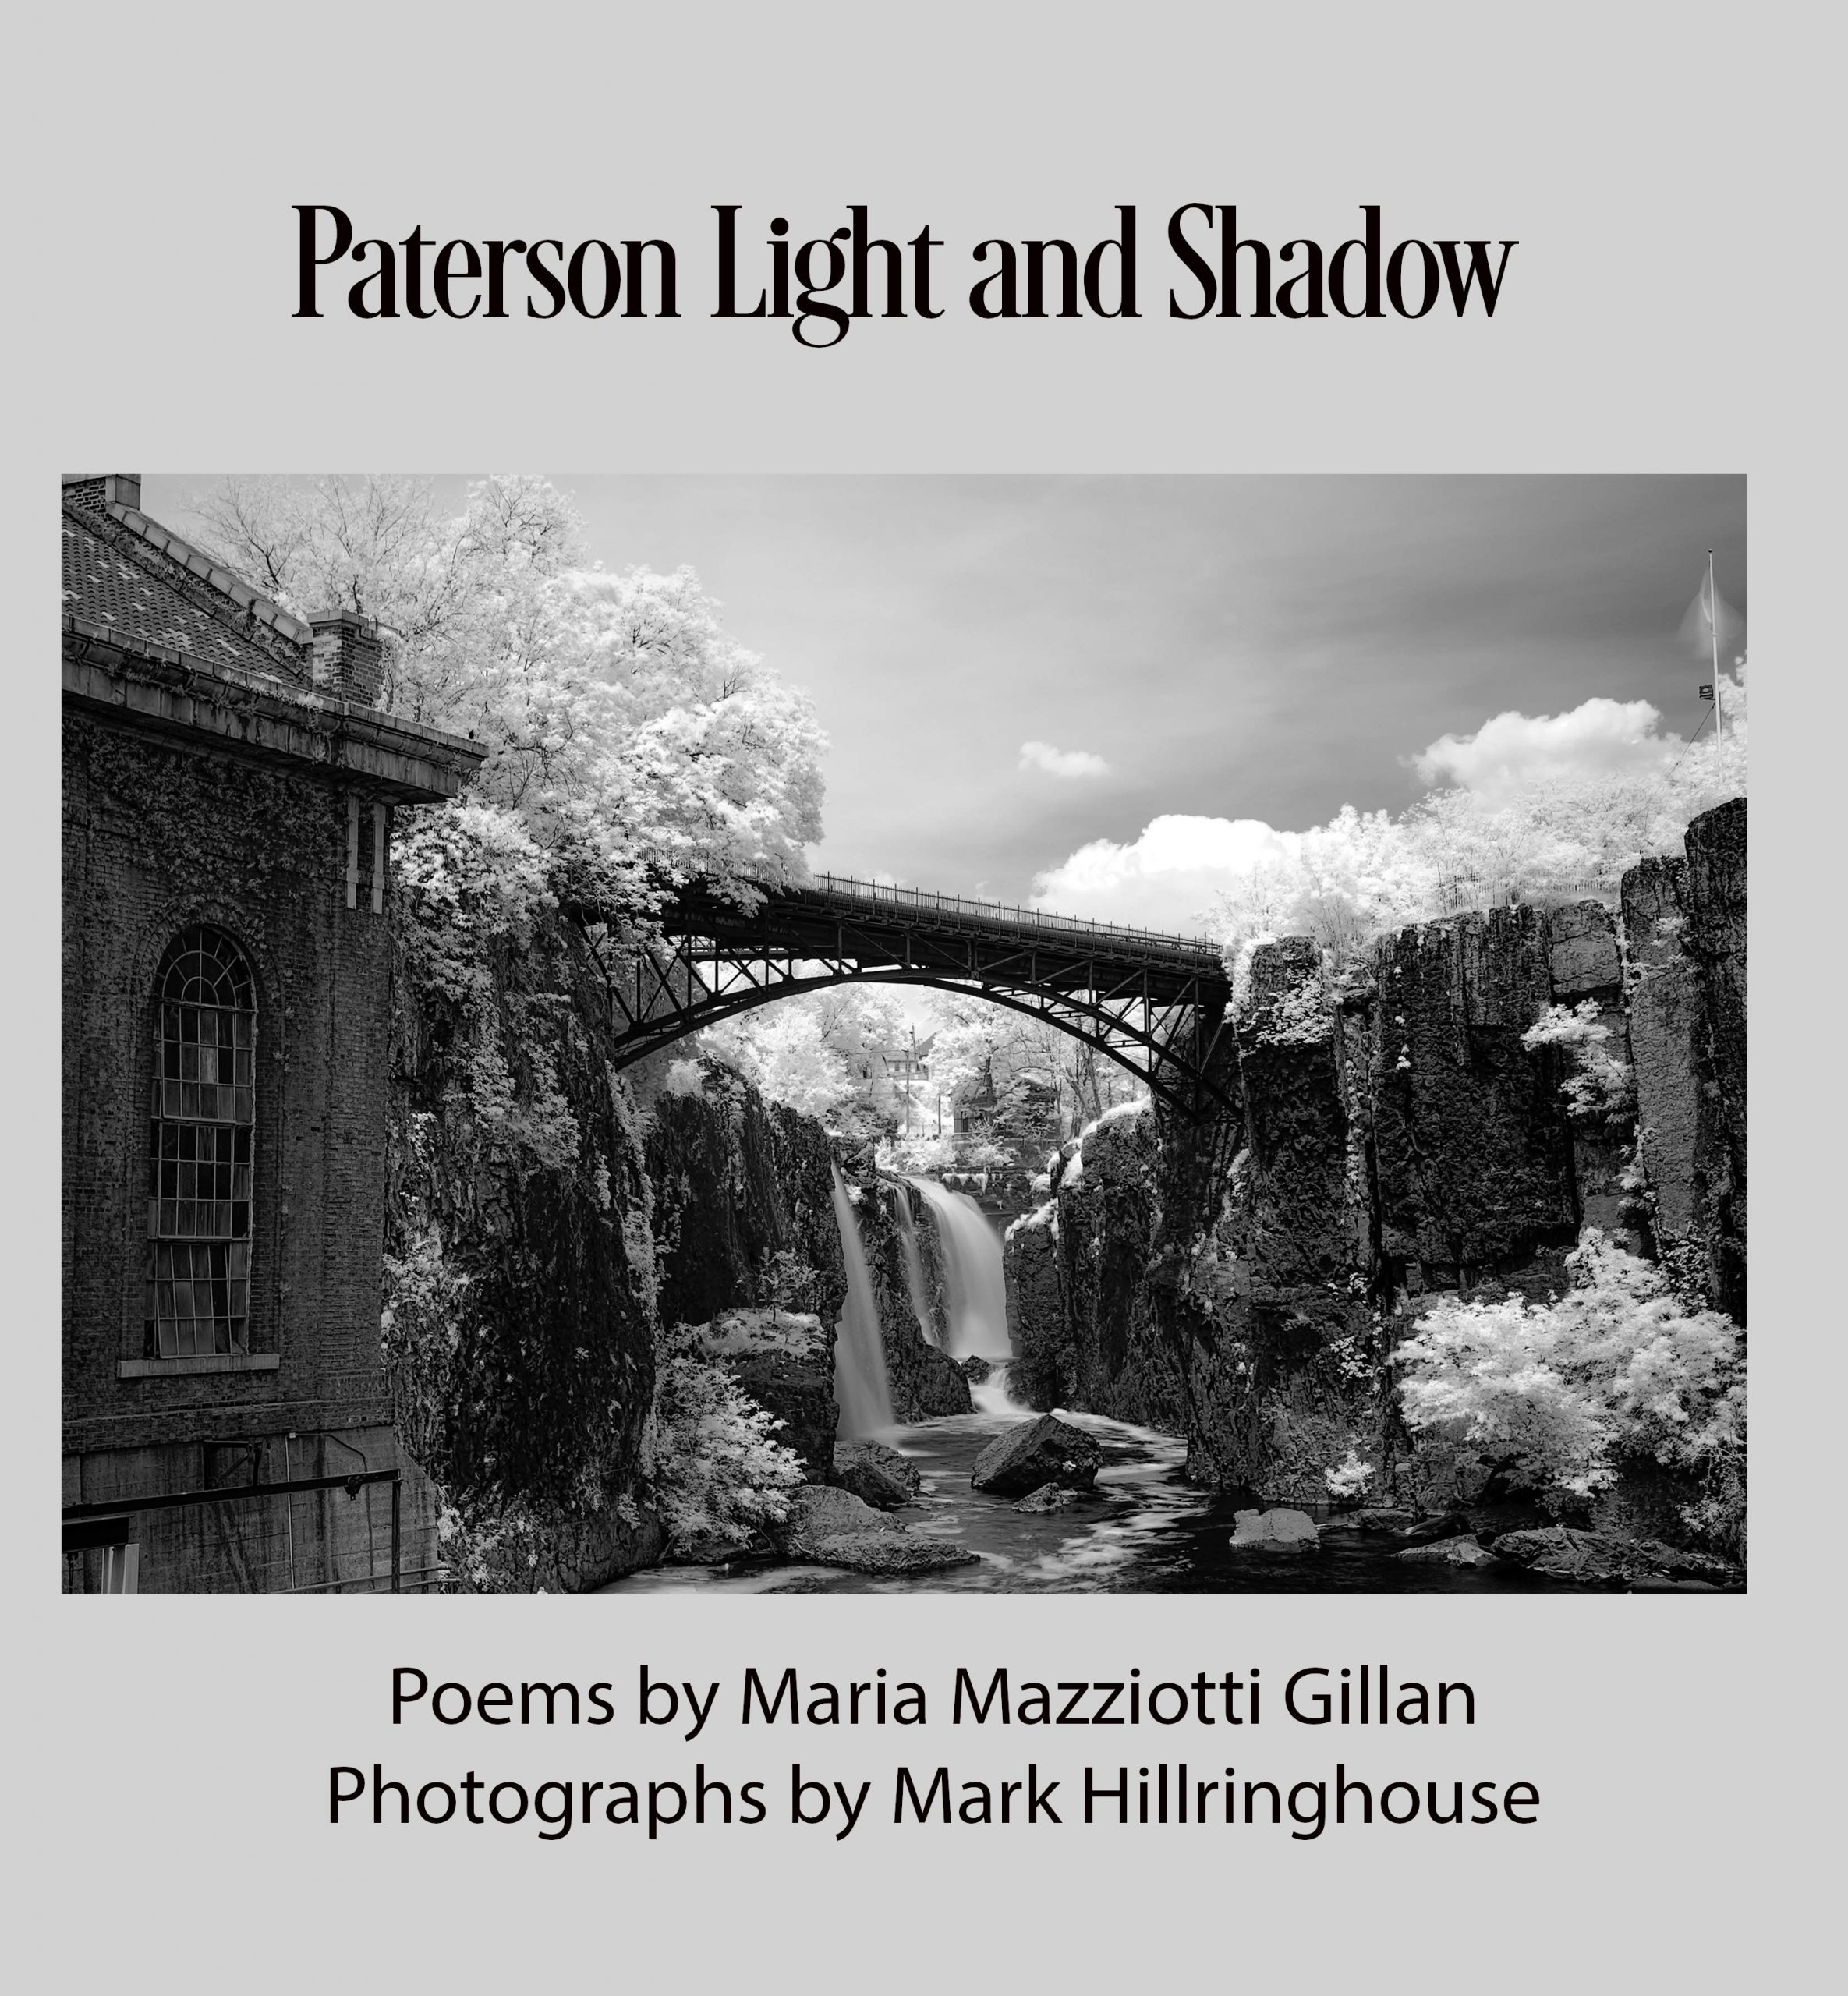 Paterson Light and Shadow